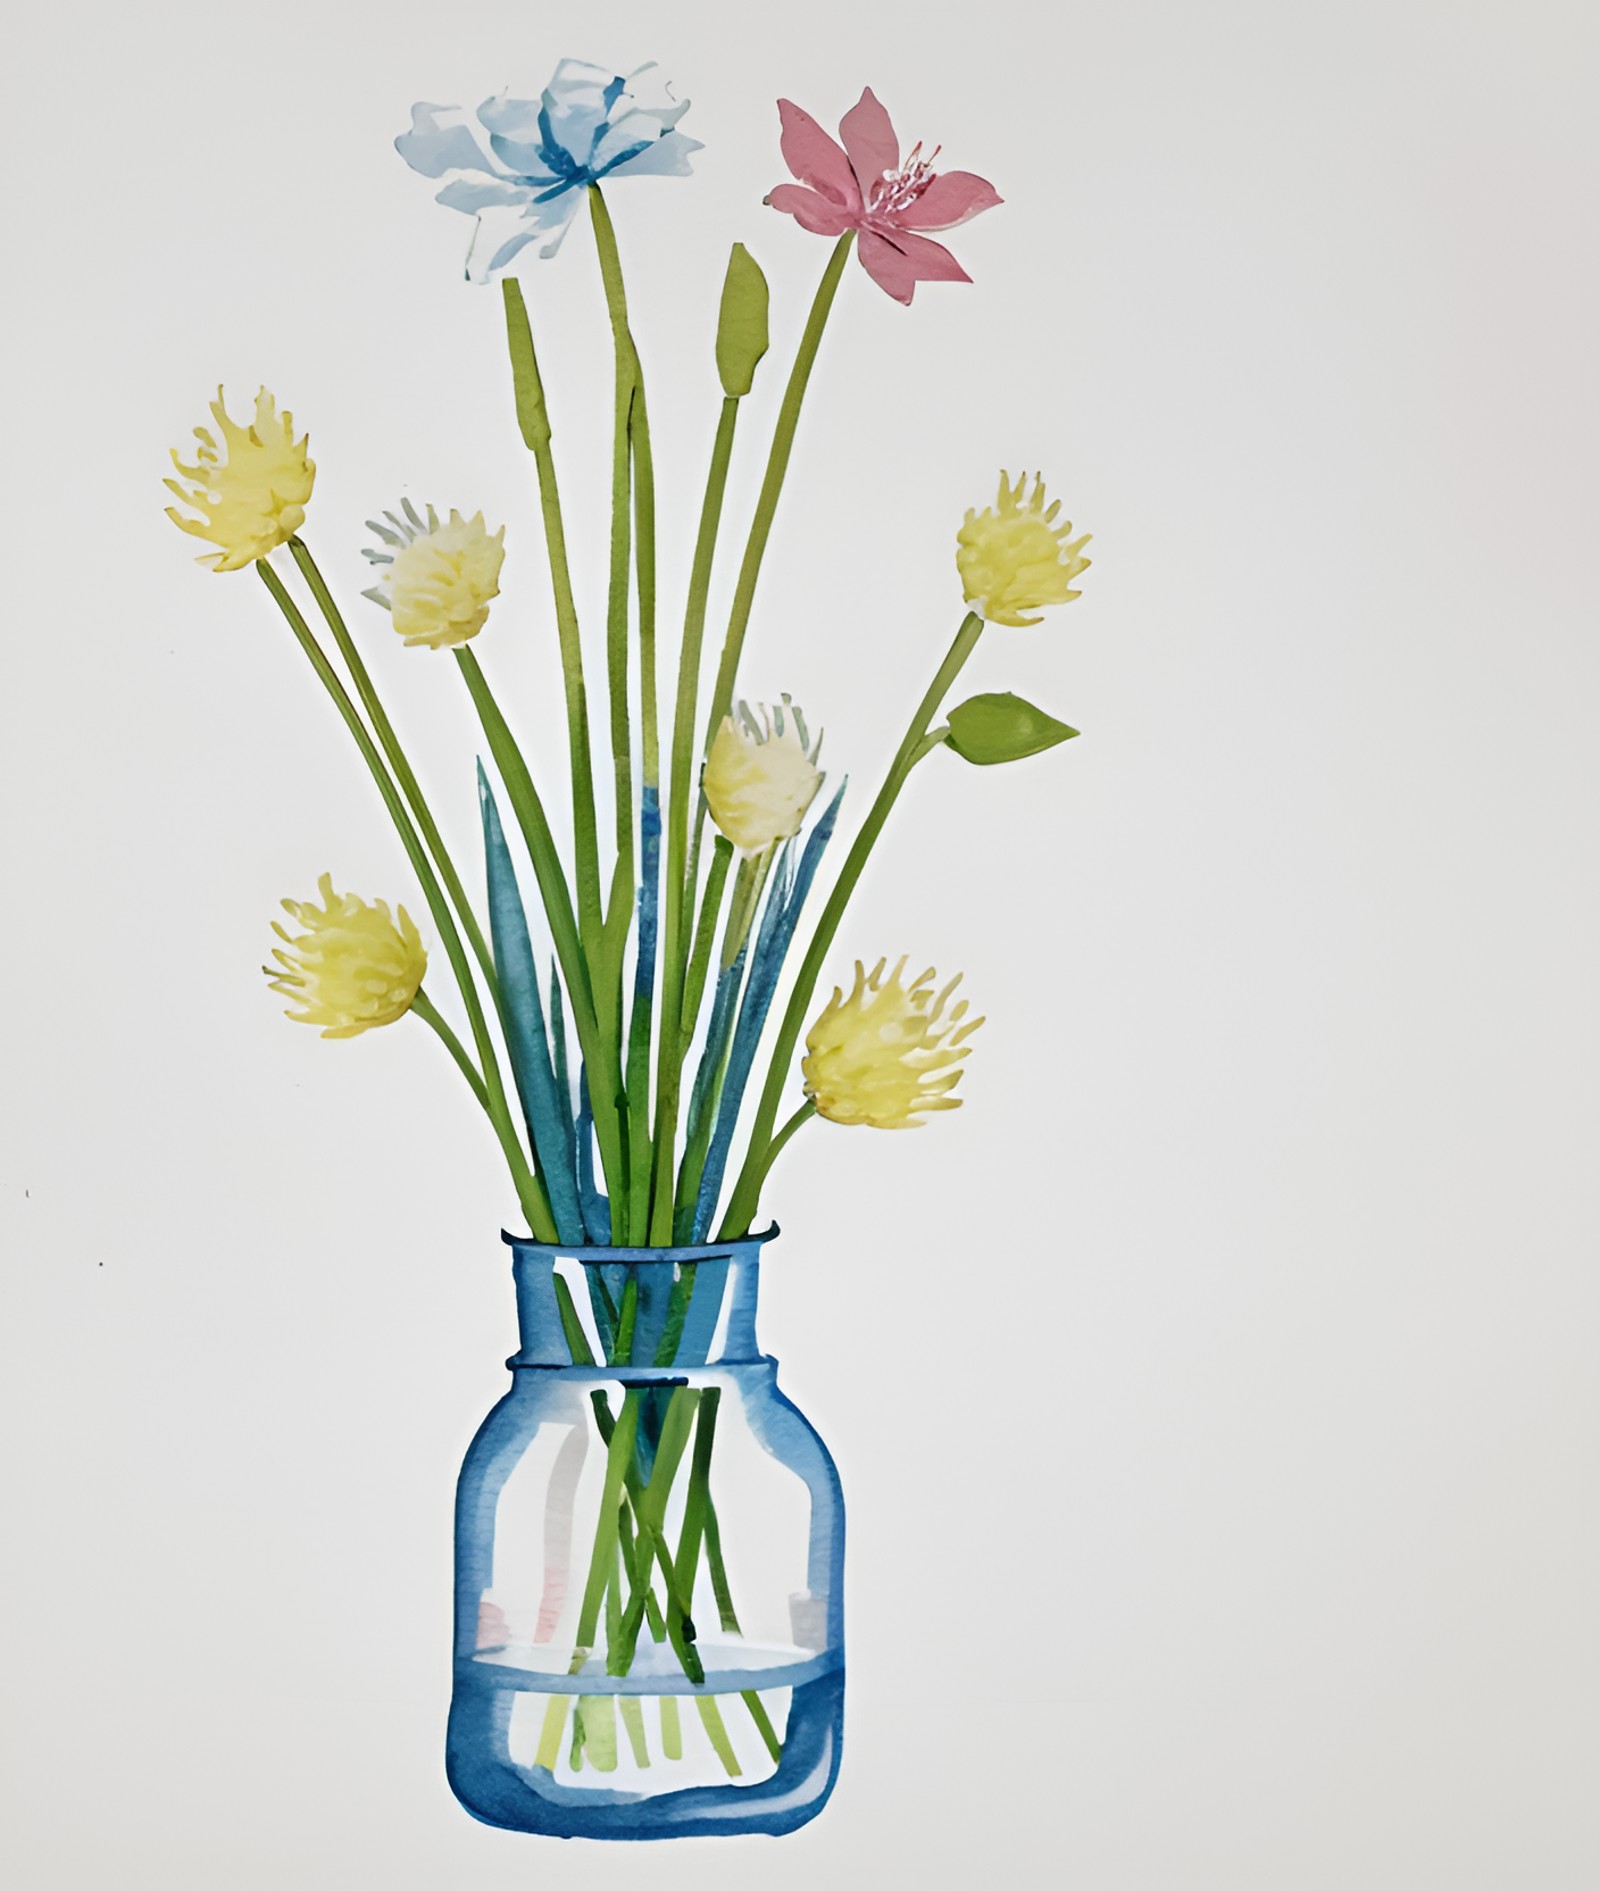 wat3rc0l0r, wc_negative_space, flowers in a glass jug, stalks, flower buds, background white patterned paper